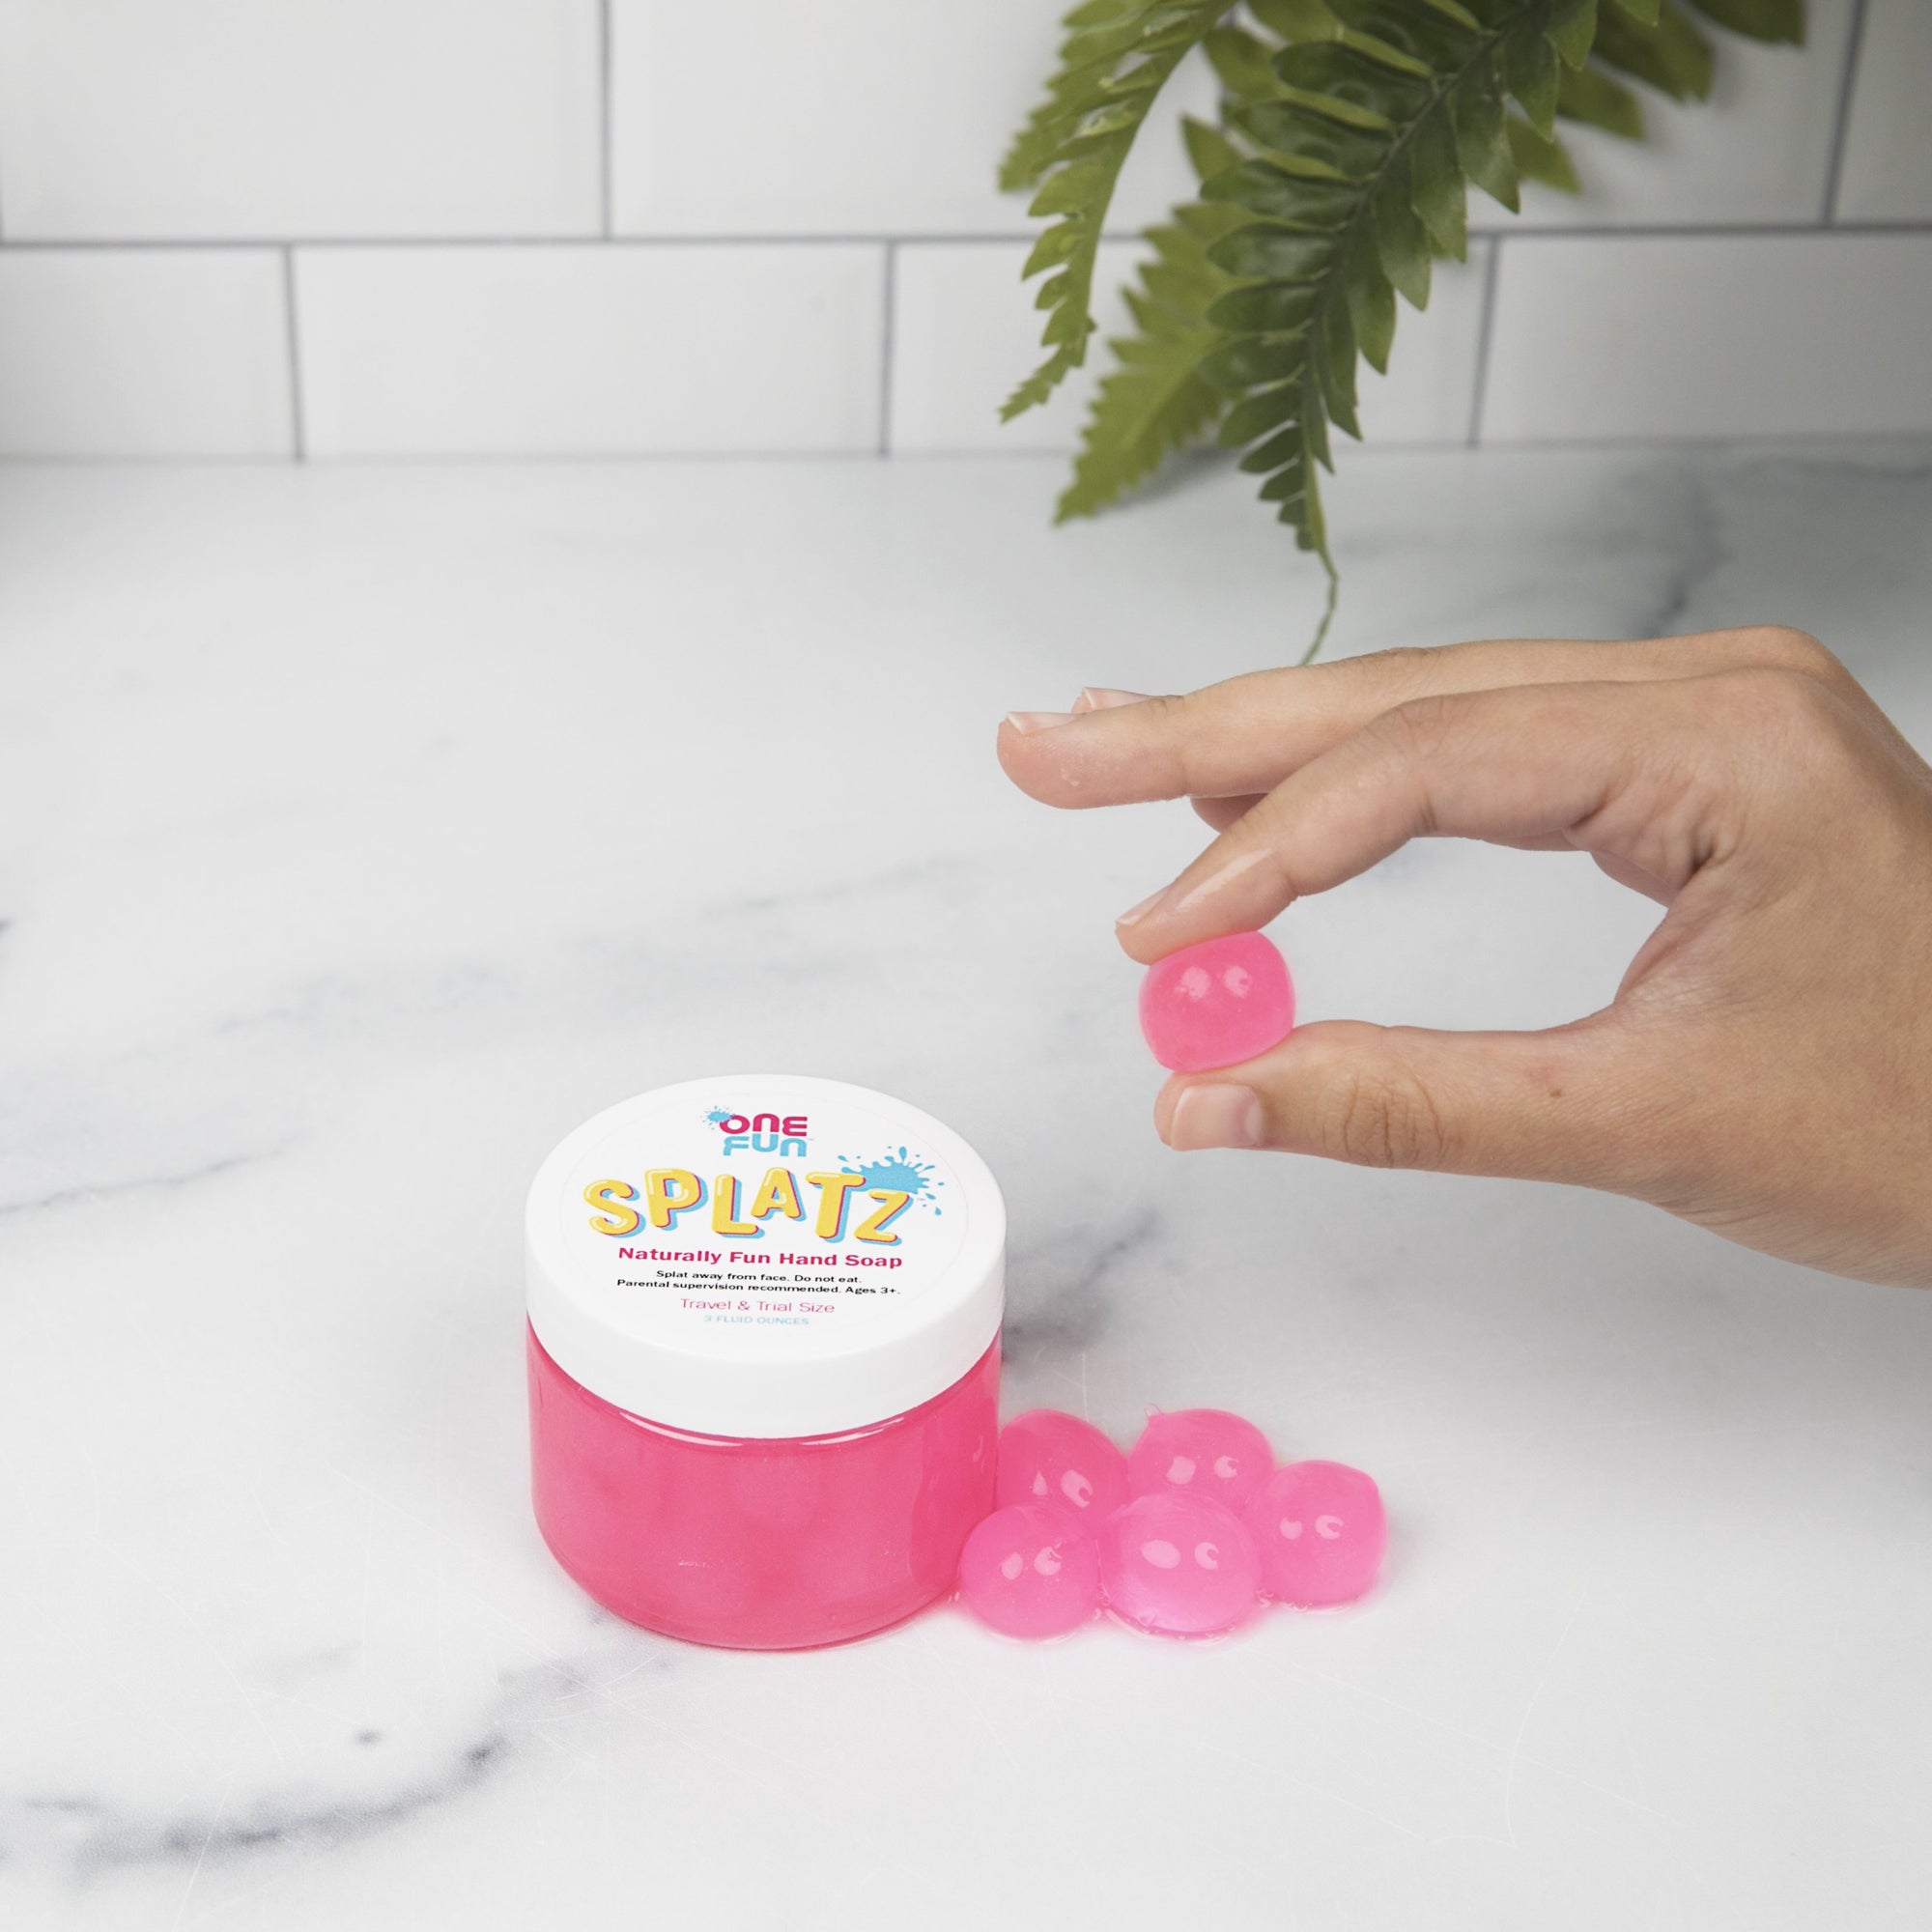 On a bathroom counter. One 3oz jar of pink bursting soap bubbles. A hand holding one pink bursting soap bubble over the jar